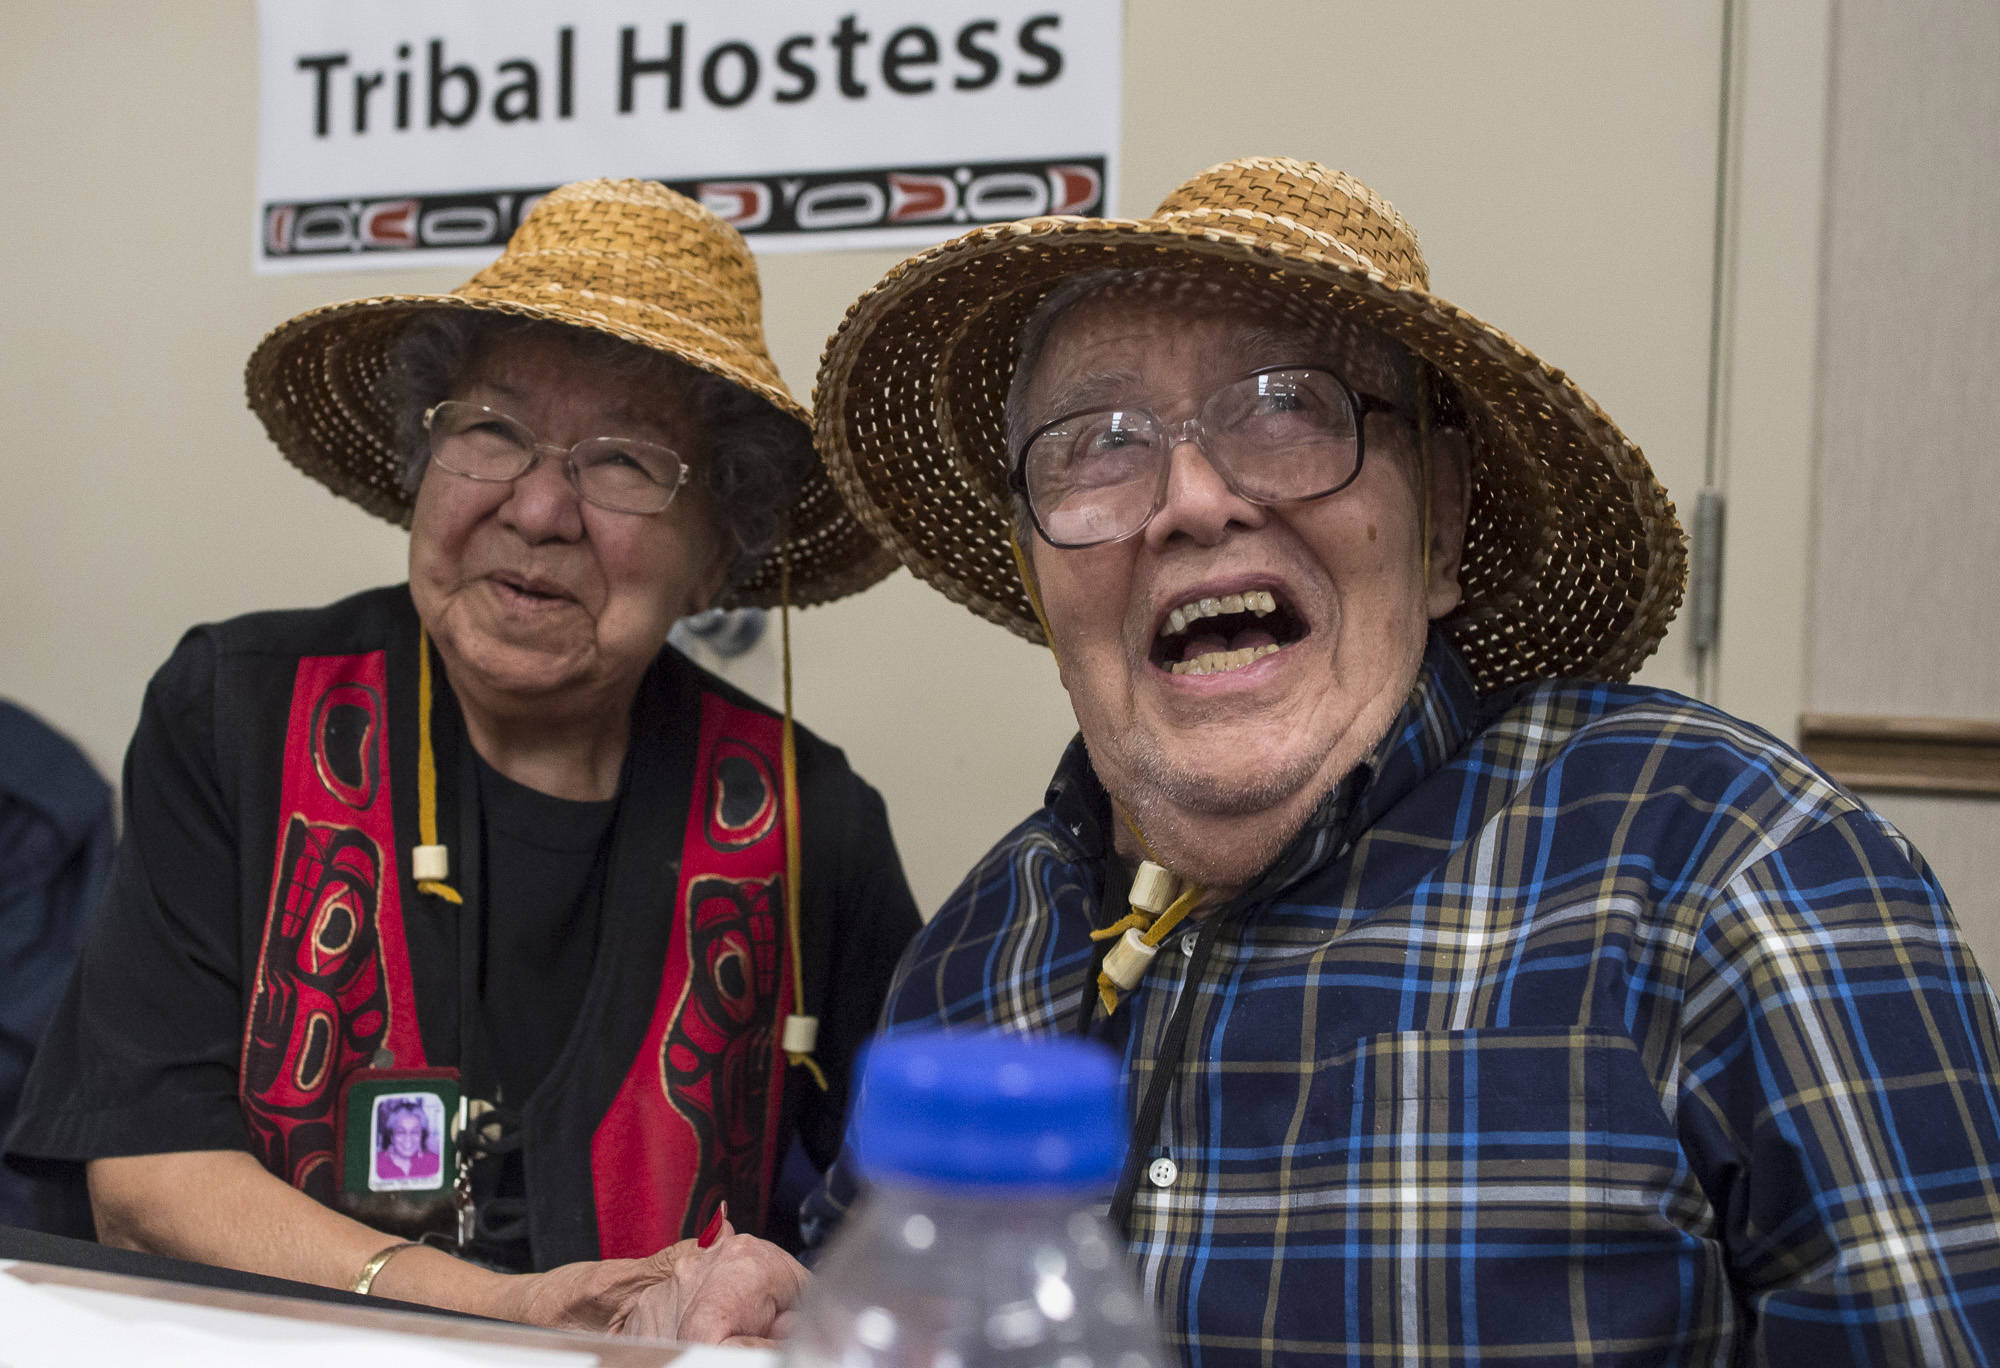 Tribal Hostess Bertha Karras, of Sitka, left, and Tribal Host Fred Hamilton Sr., of Craig, share a laugh at the 83rd Annual Tribal Assembly of the Central Council of the Tlingit and Haida Indian Tribes of Alaska at Elizabeth Peratrovich Hall on Wednesday, April 18, 2018. (Michael Penn | Juneau Empire)